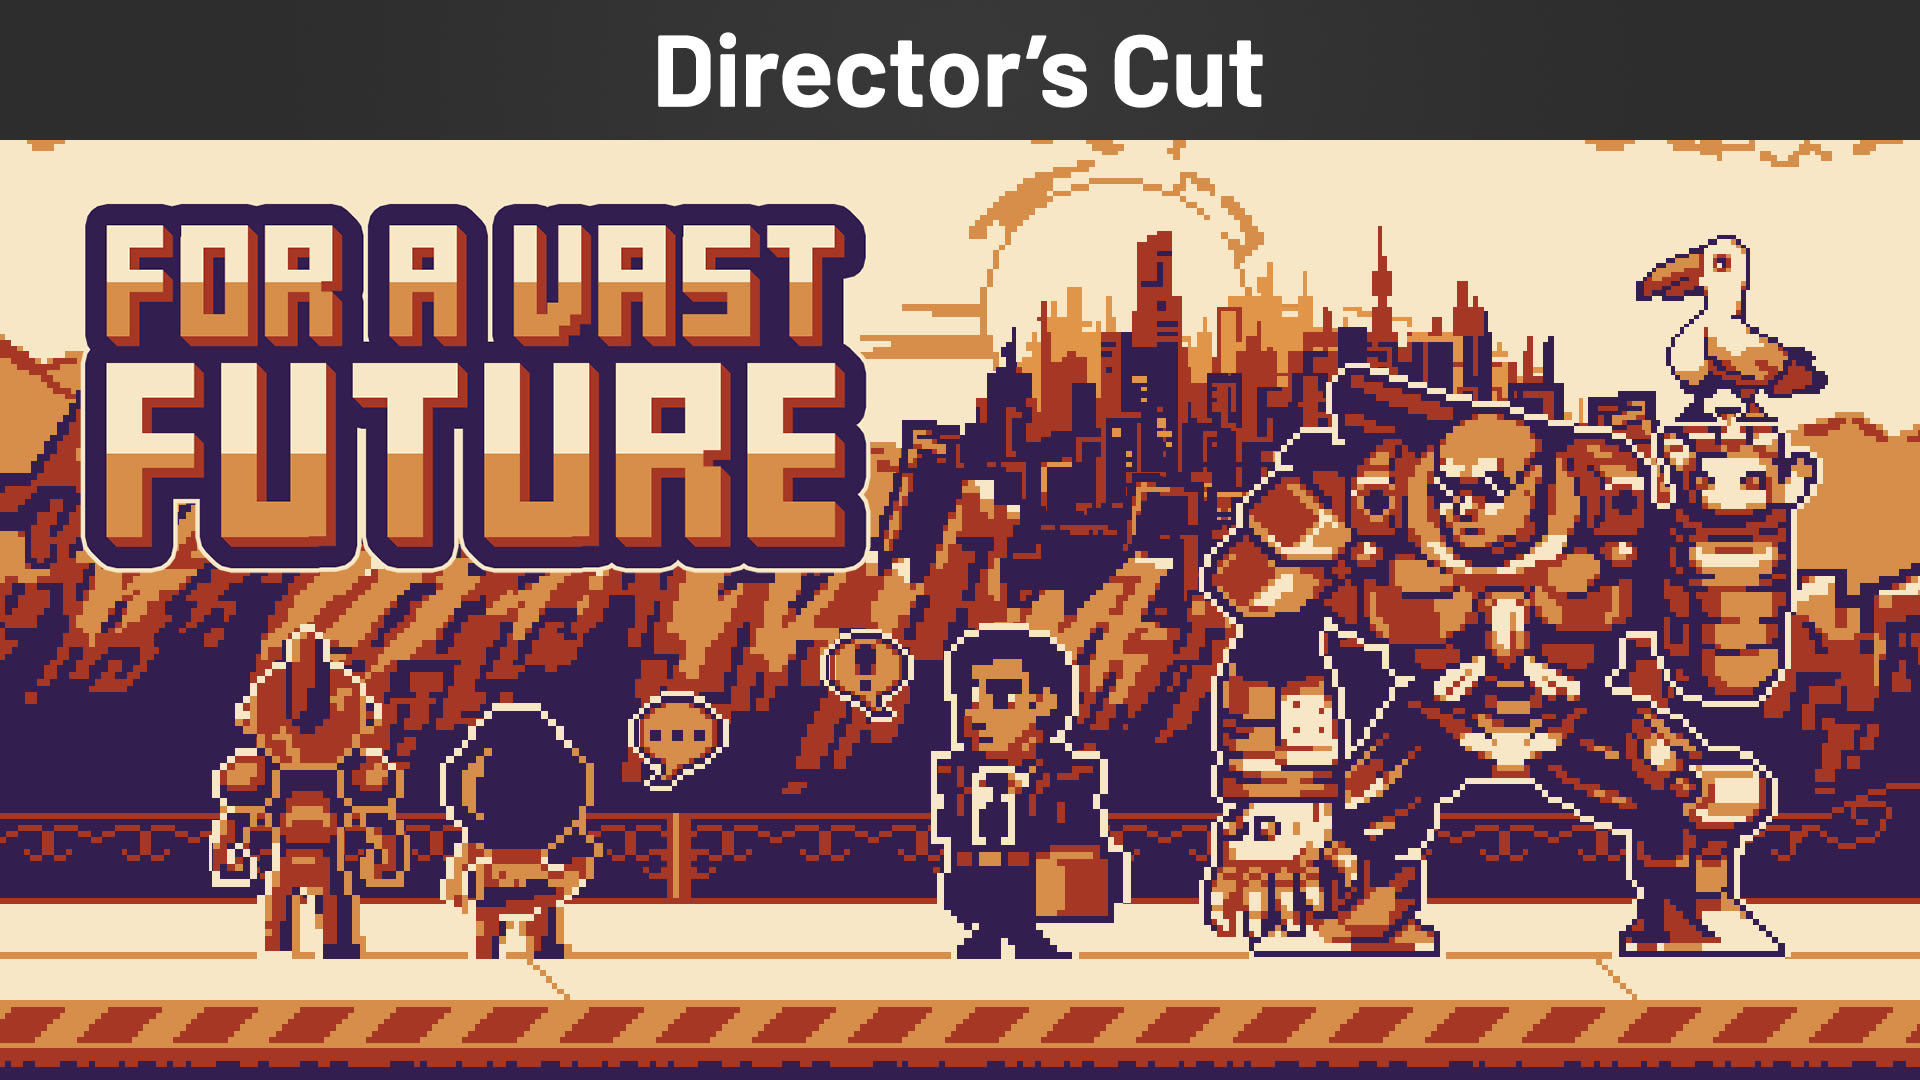 For a Vast Future Director's Cut